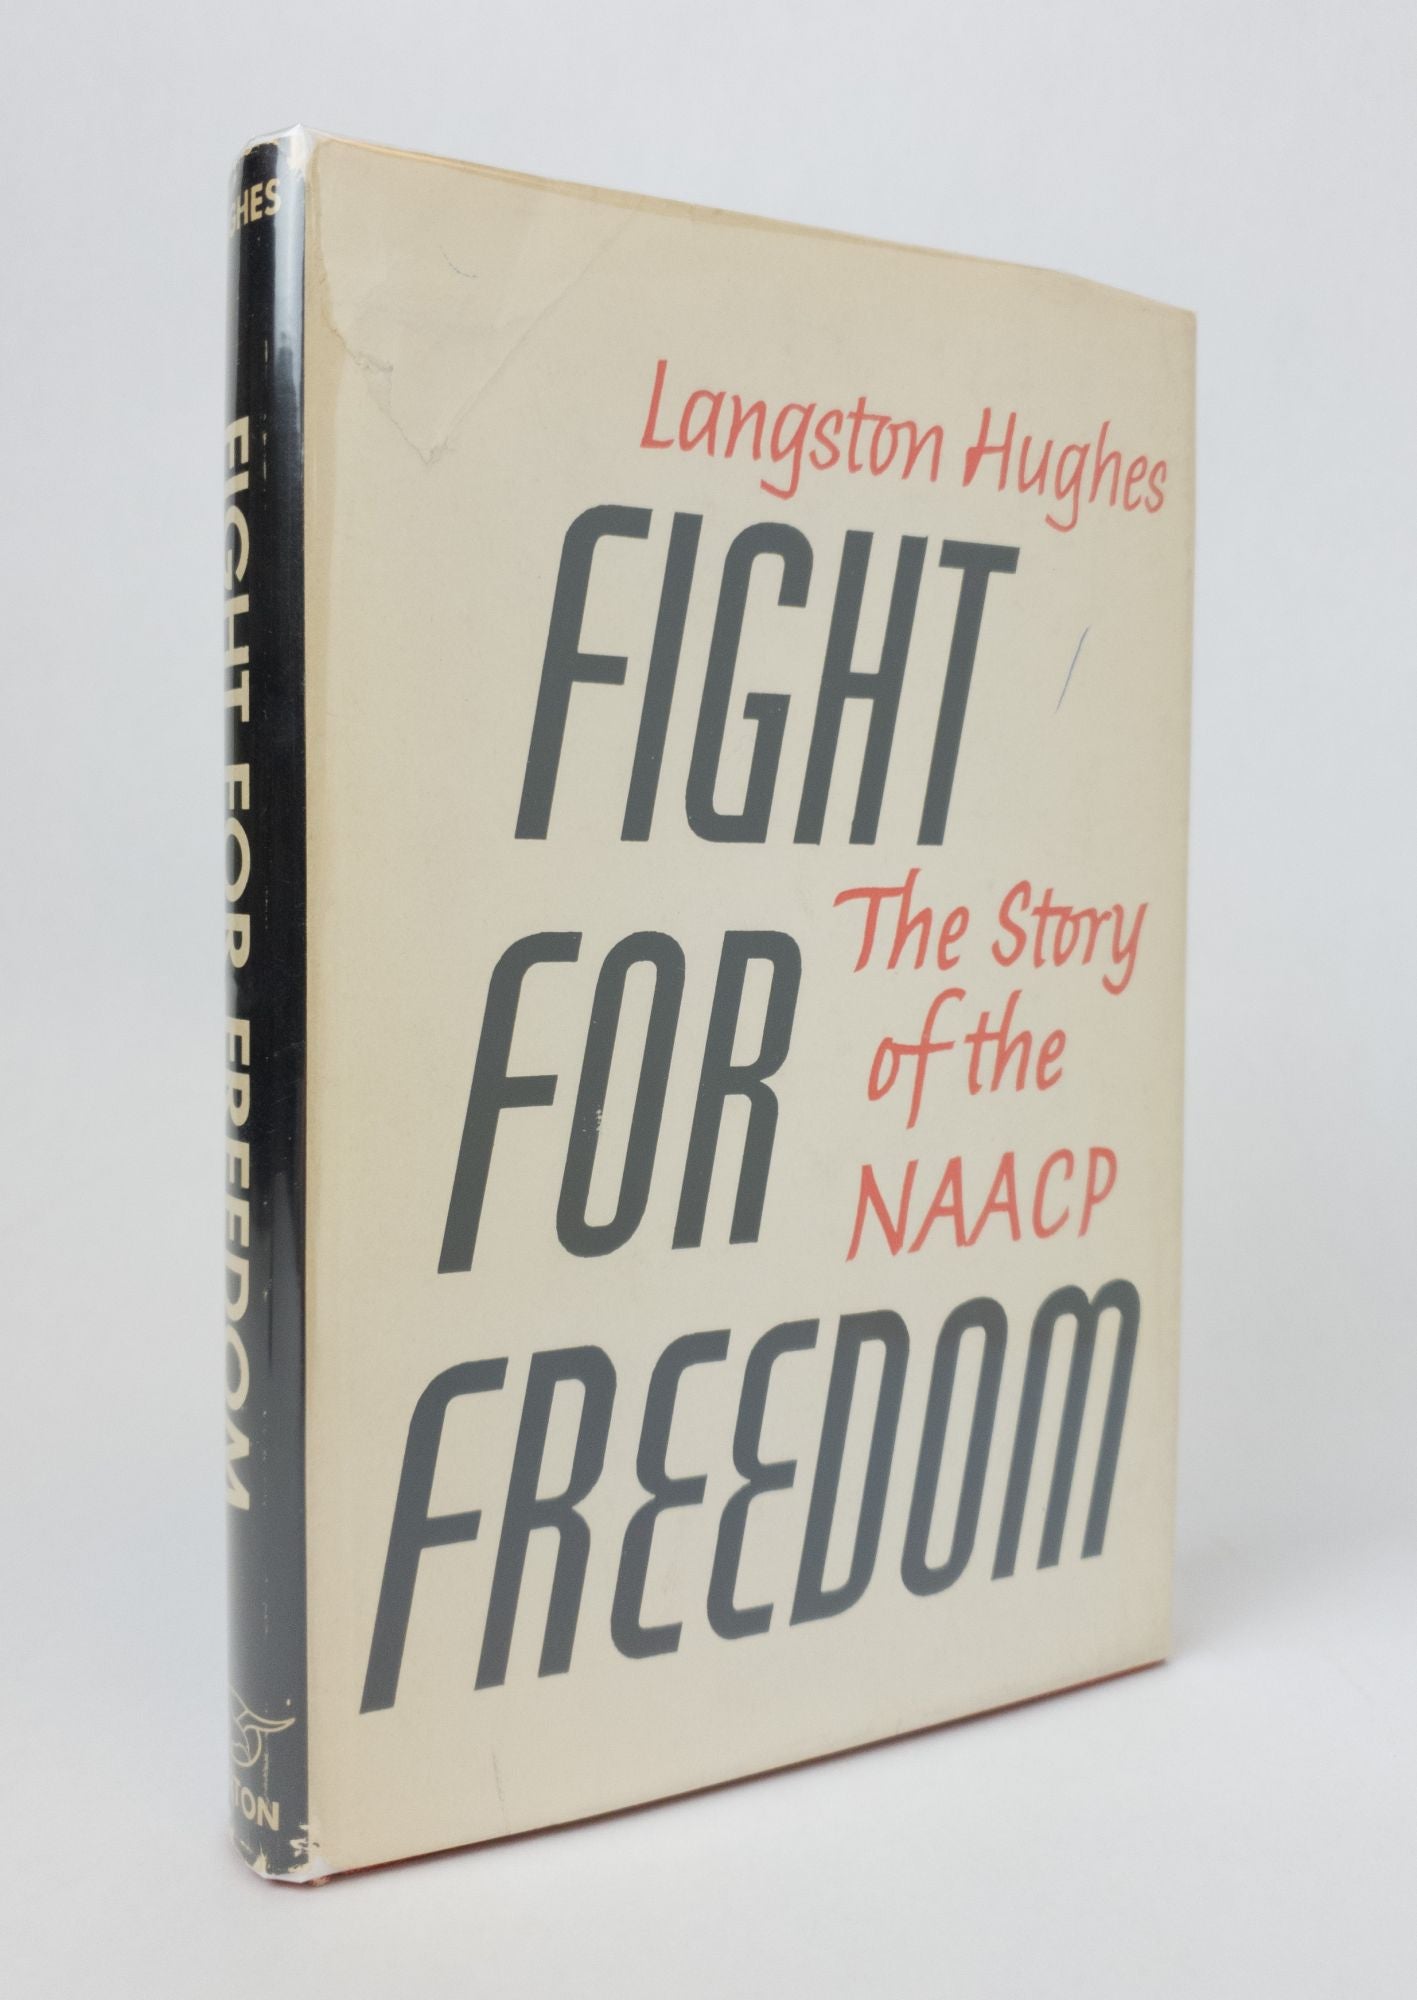 Product Image for FIGHT FOR FREEDOM - THE STORY OF THE NAACP [Inscribed to Eunice Carter]